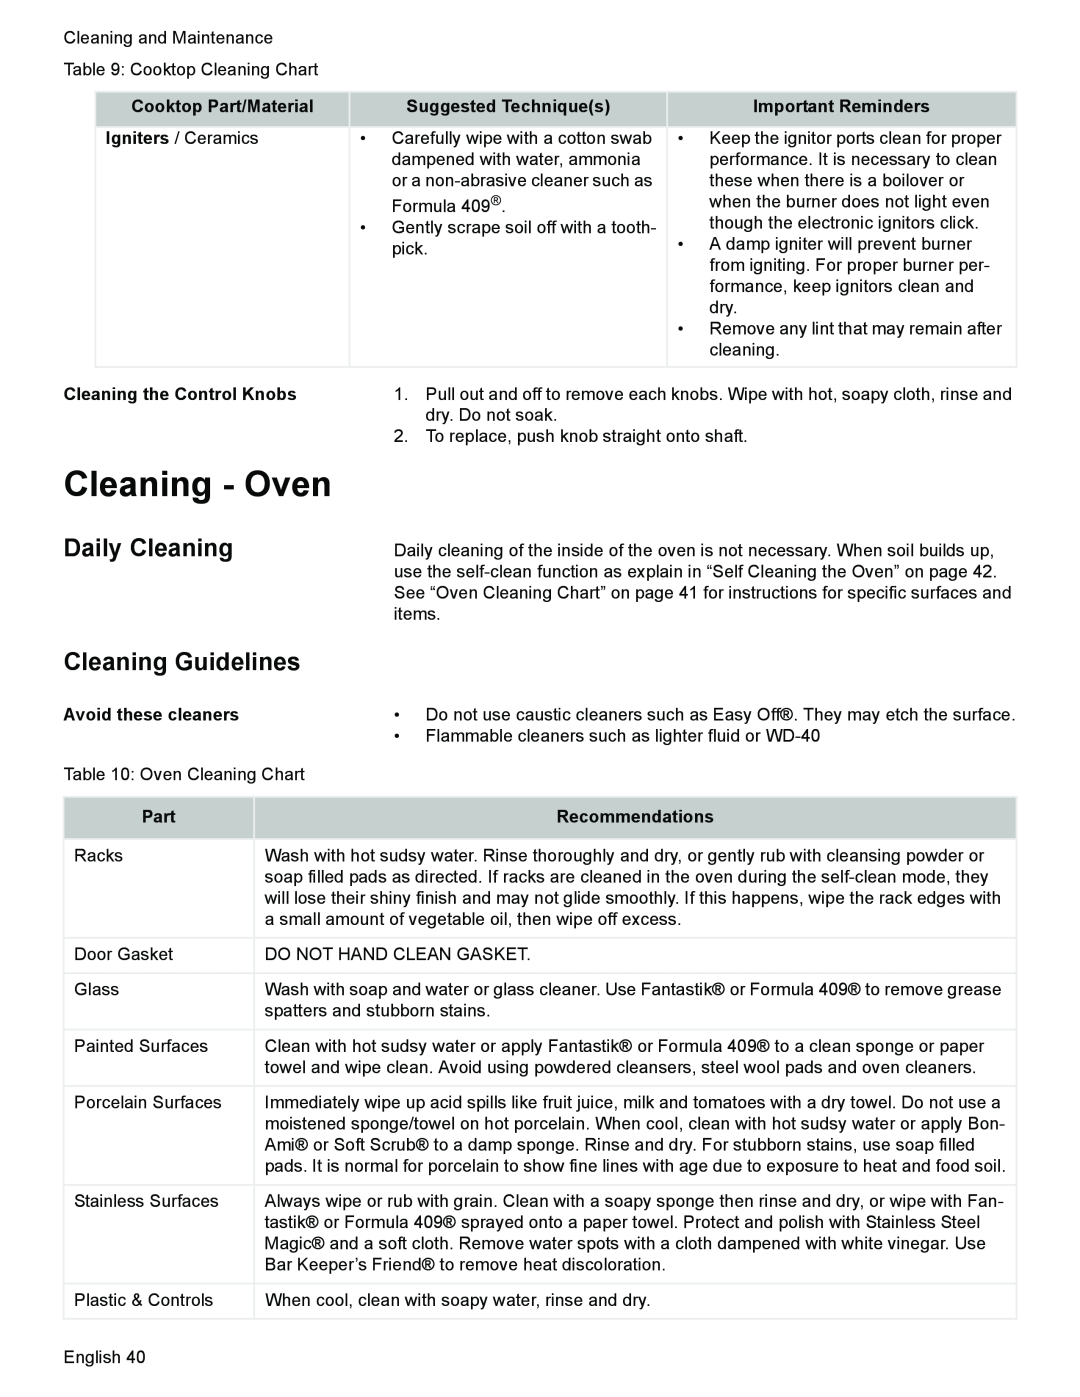 Siemens HD2528U Cleaning - Oven, Cleaning the Control Knobs, Avoid these cleaners, Part, Recommendations, Daily Cleaning 